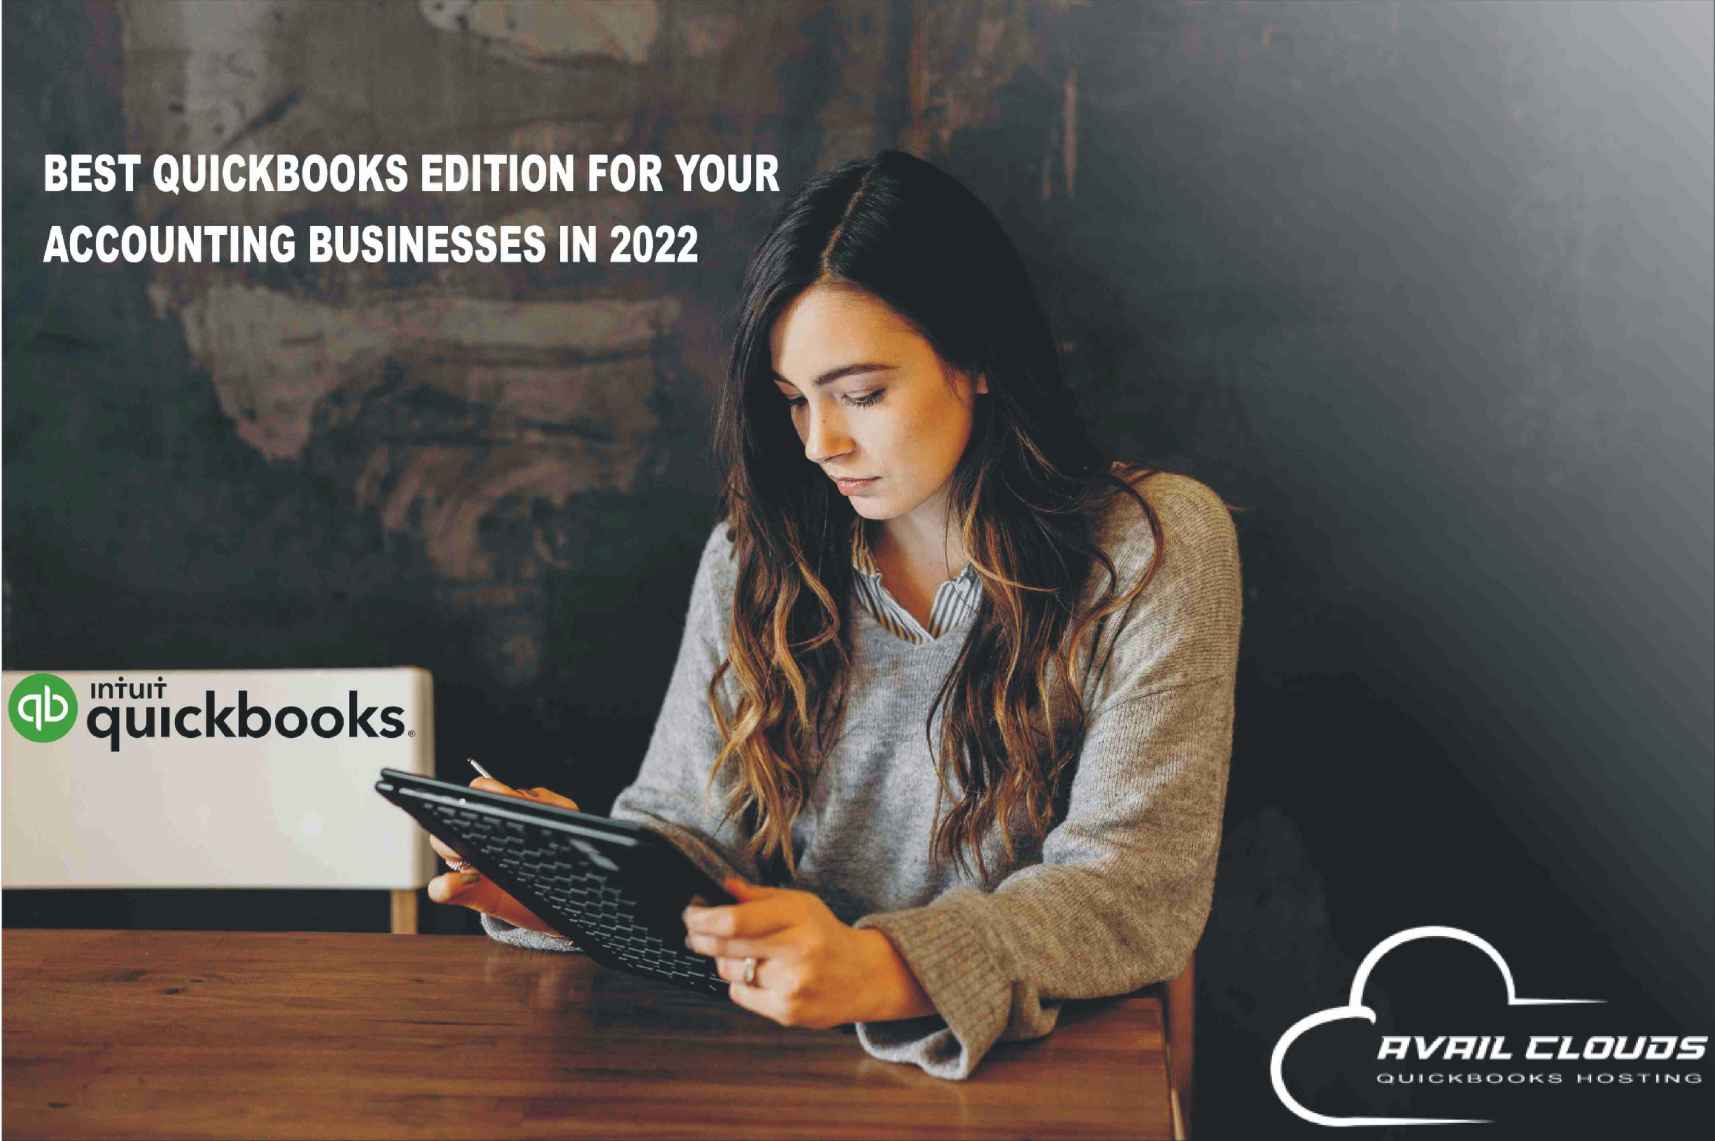 Best QuickBooks Edition For Your Accounting Busniesses In 2022 Availclouds.com